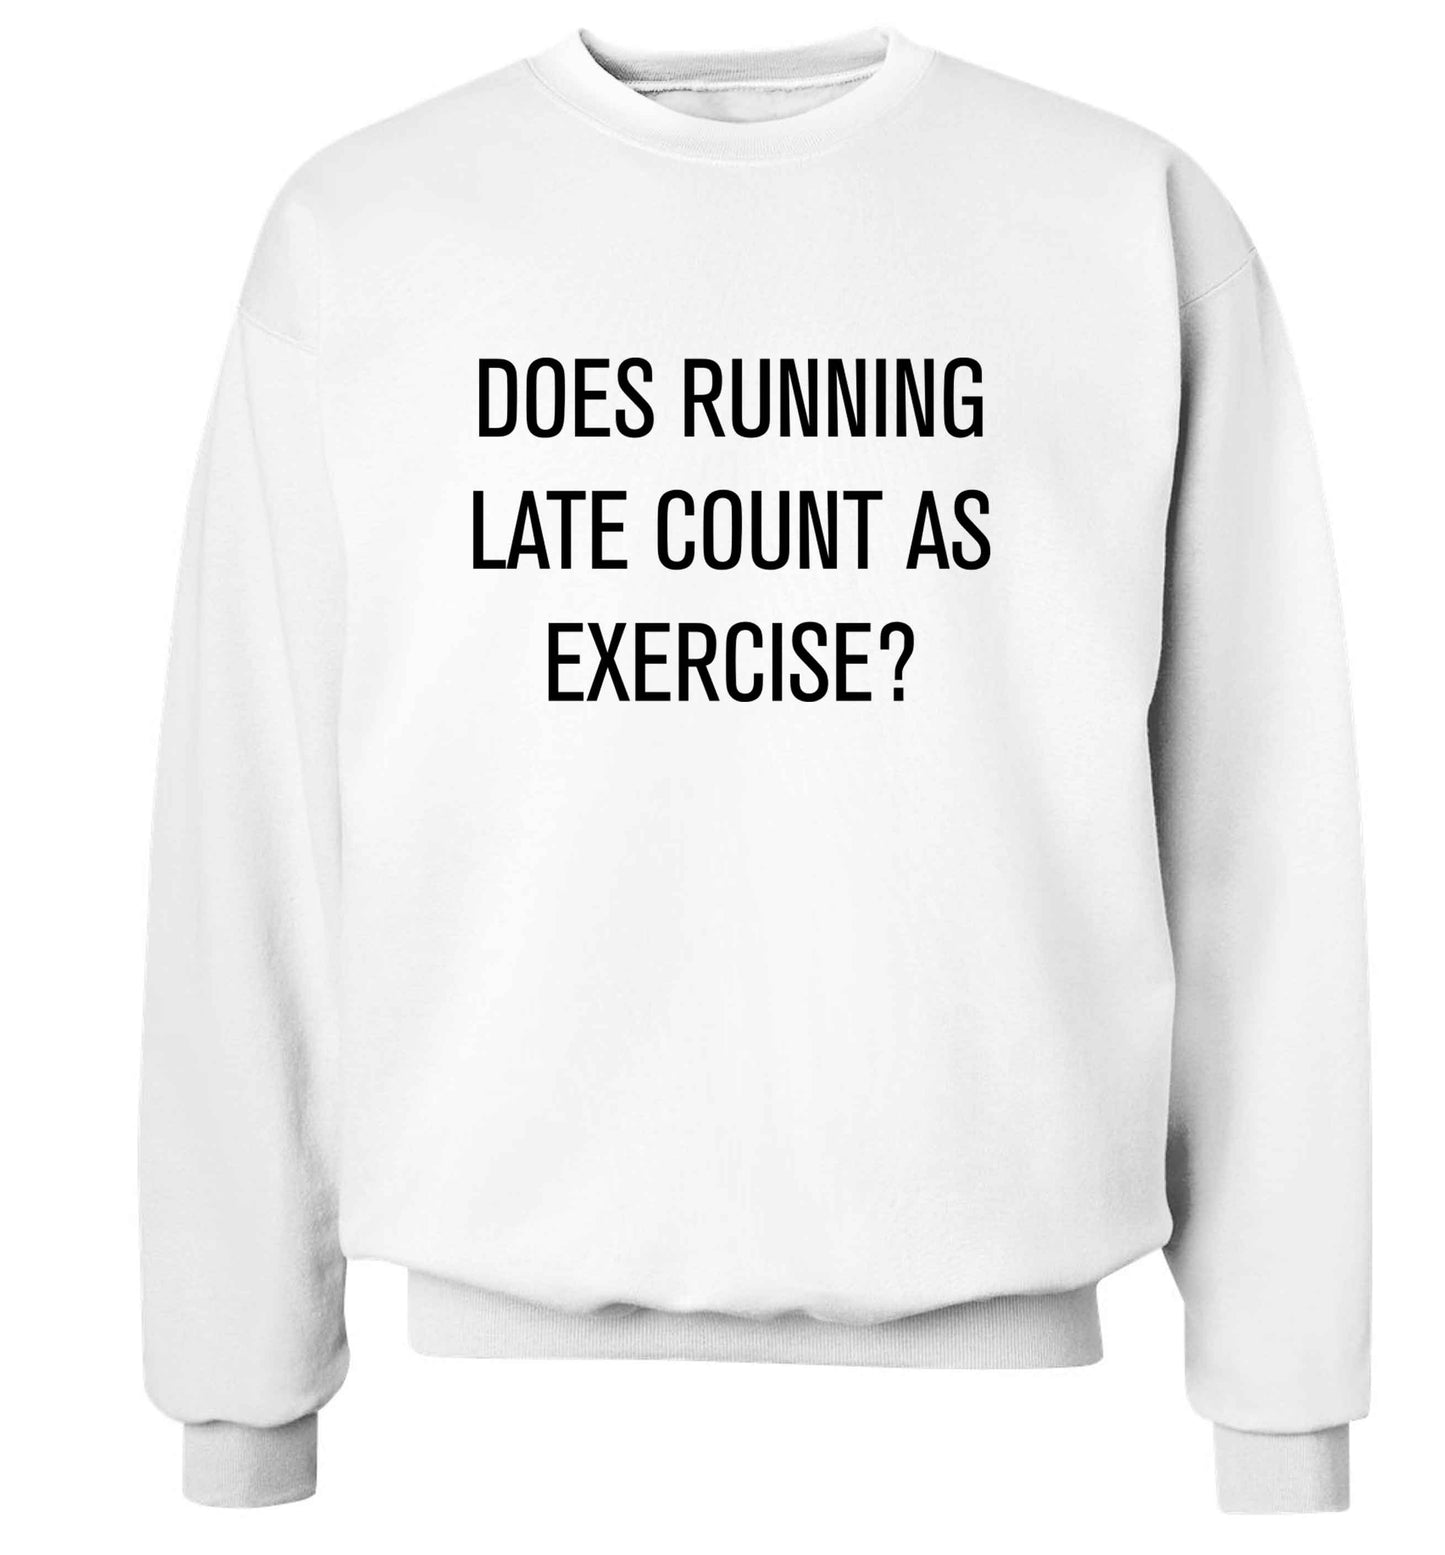 Does running late count as exercise? adult's unisex white sweater 2XL